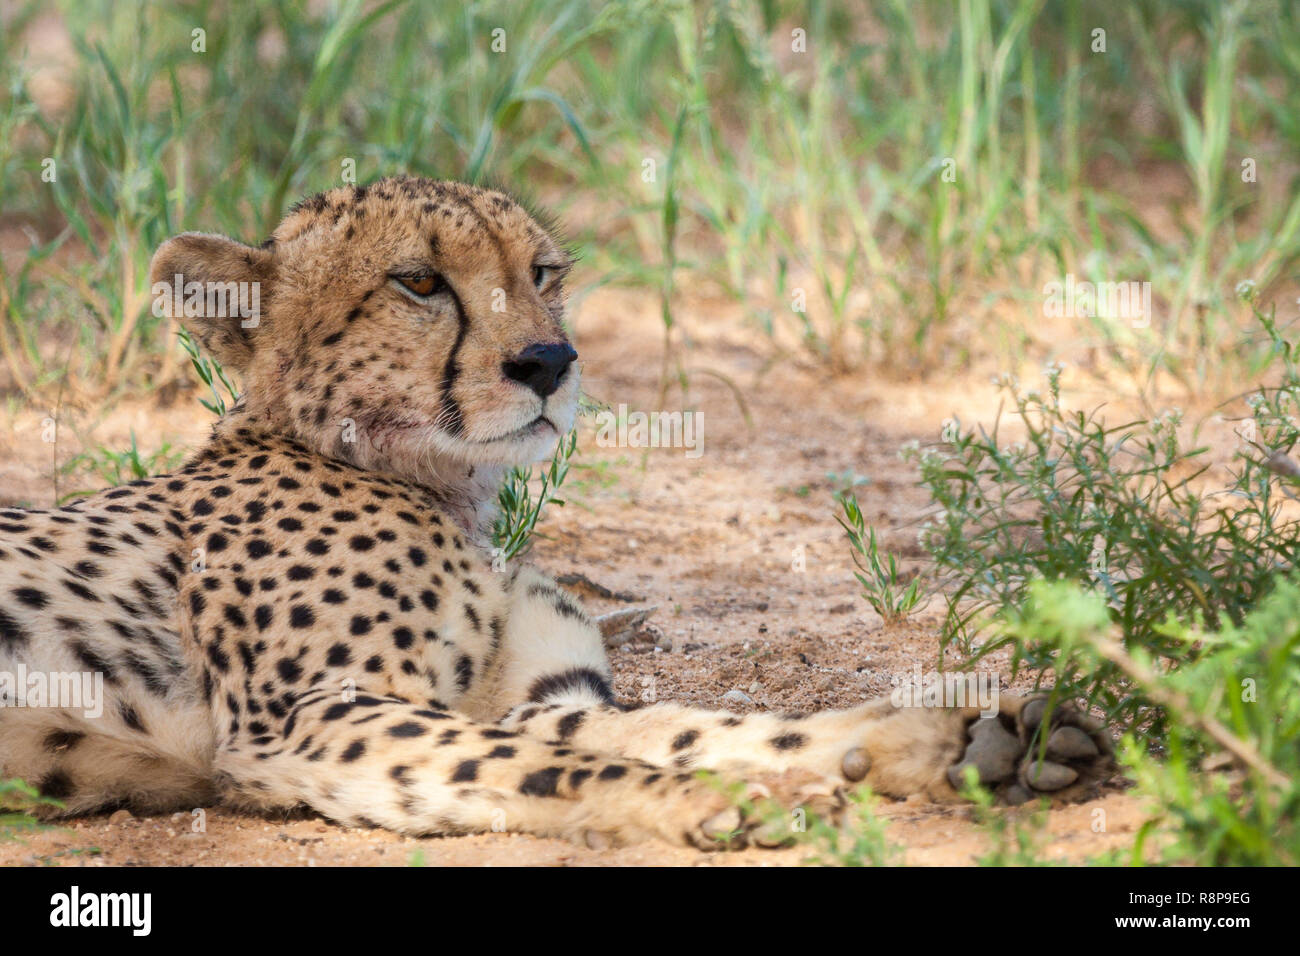 Endangered cheetah resting in shade Stock Photo